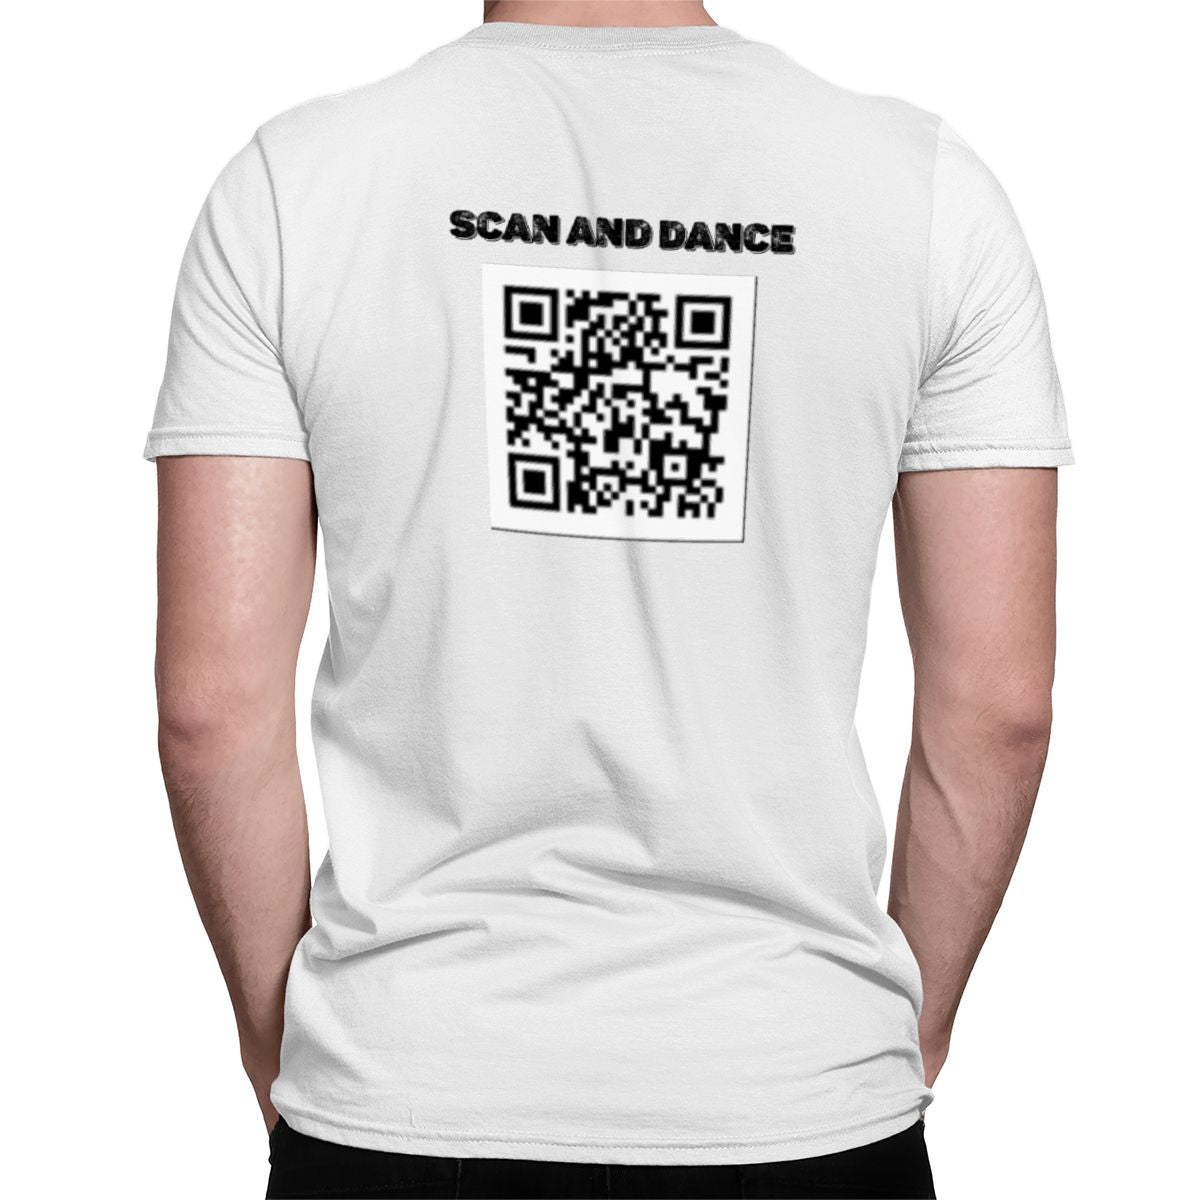 Scan and Dance T-Shirt. Tito Ortos collection NFT edition